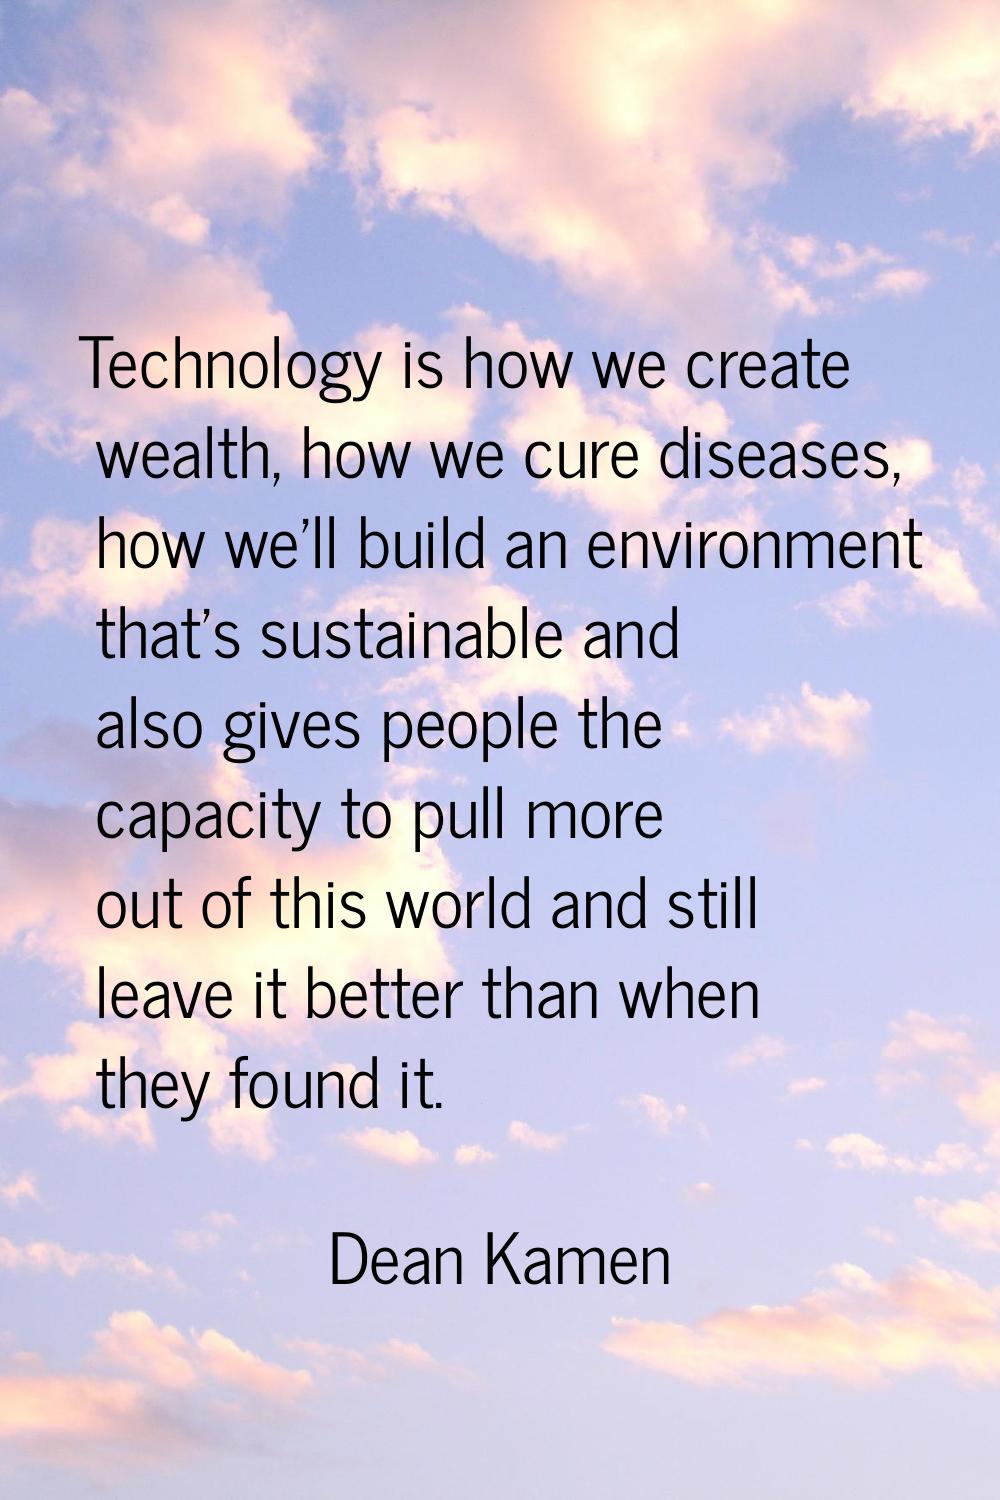 Technology is how we create wealth, how we cure diseases, how we'll build an environment that's sus